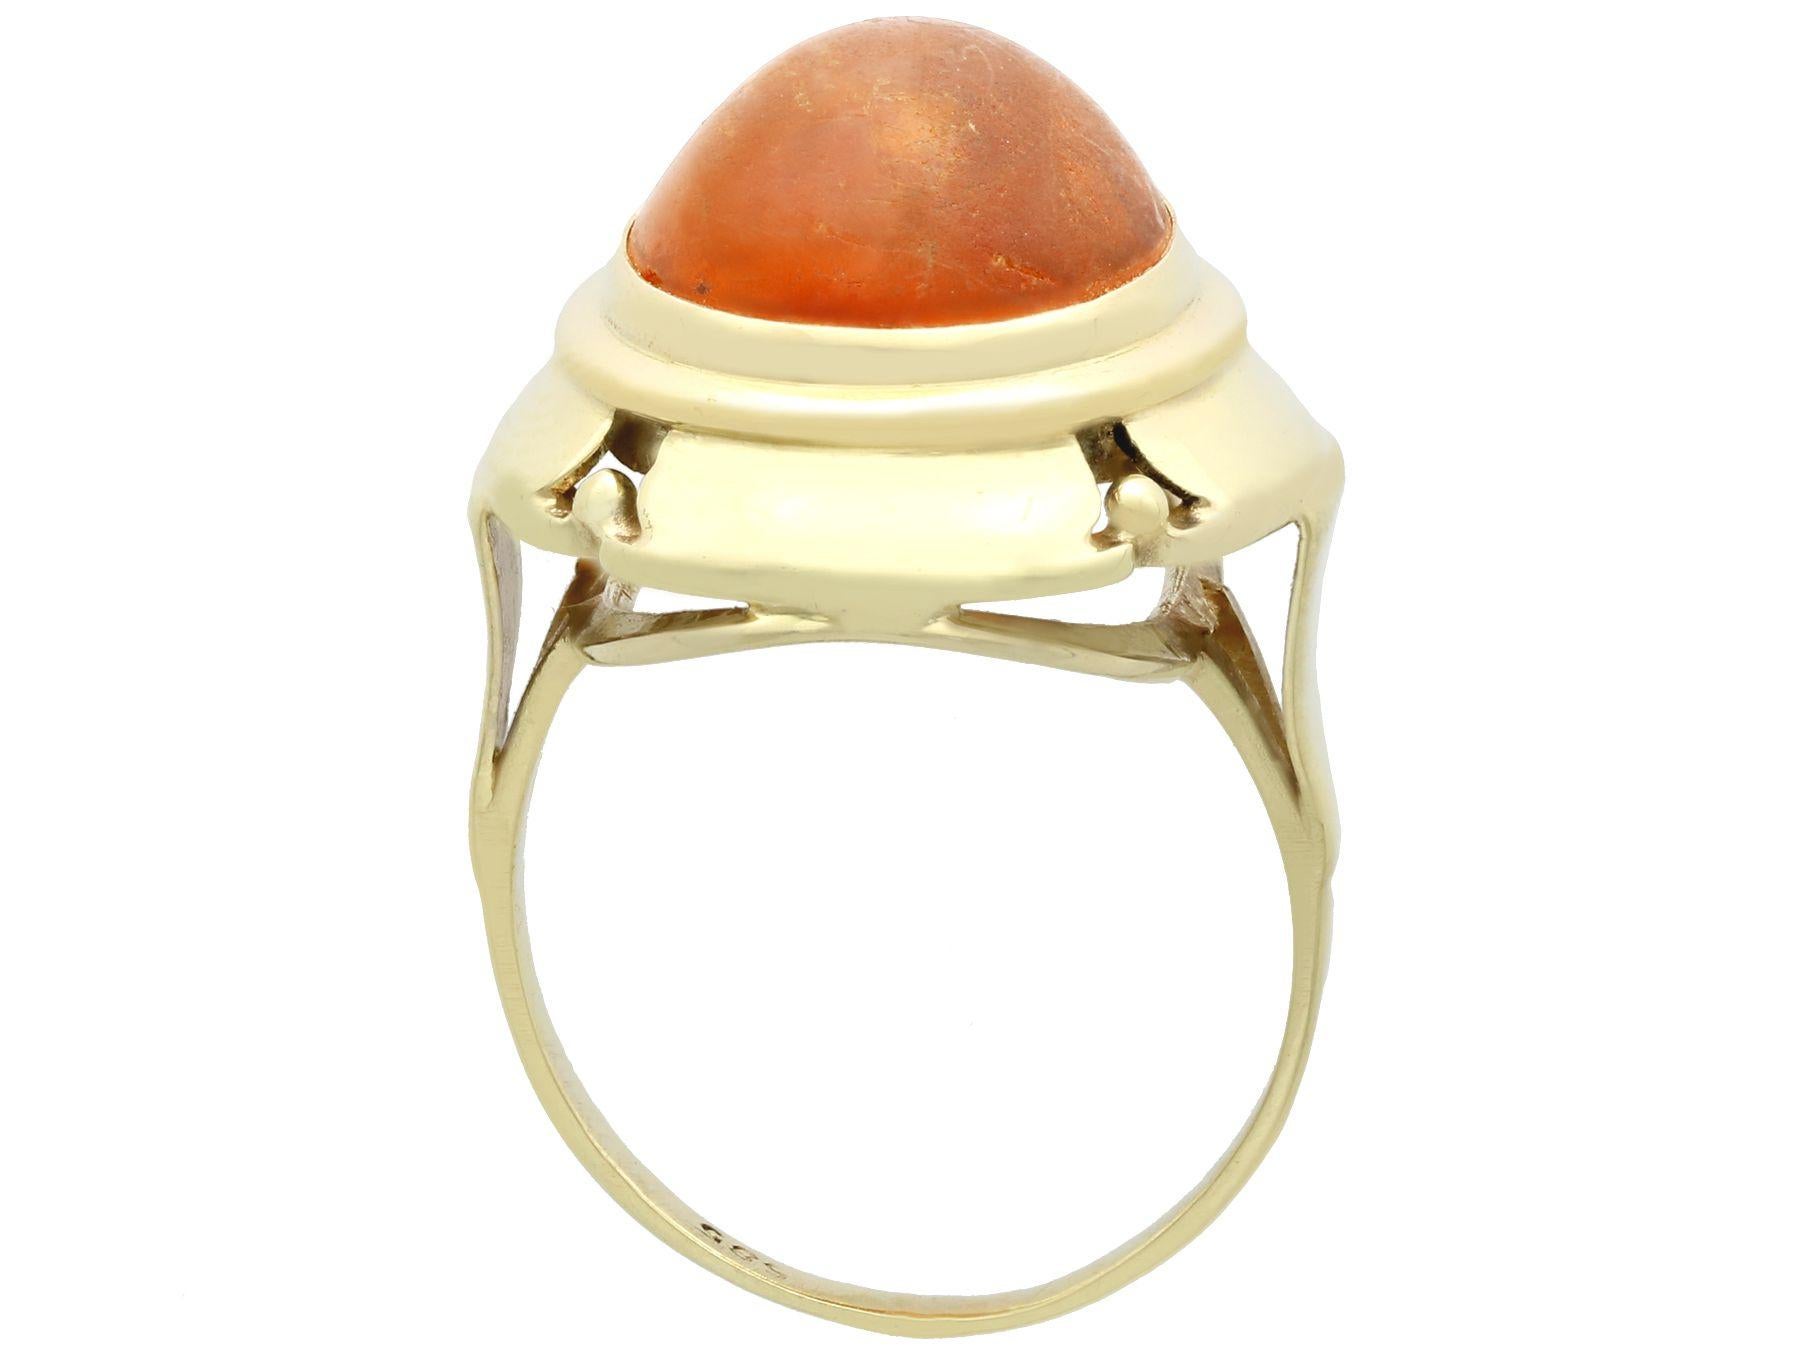 Vintage 1940s 4.61 Carat Cabochon Cut Amber and Yellow Gold Cocktail Ring In Excellent Condition For Sale In Jesmond, Newcastle Upon Tyne